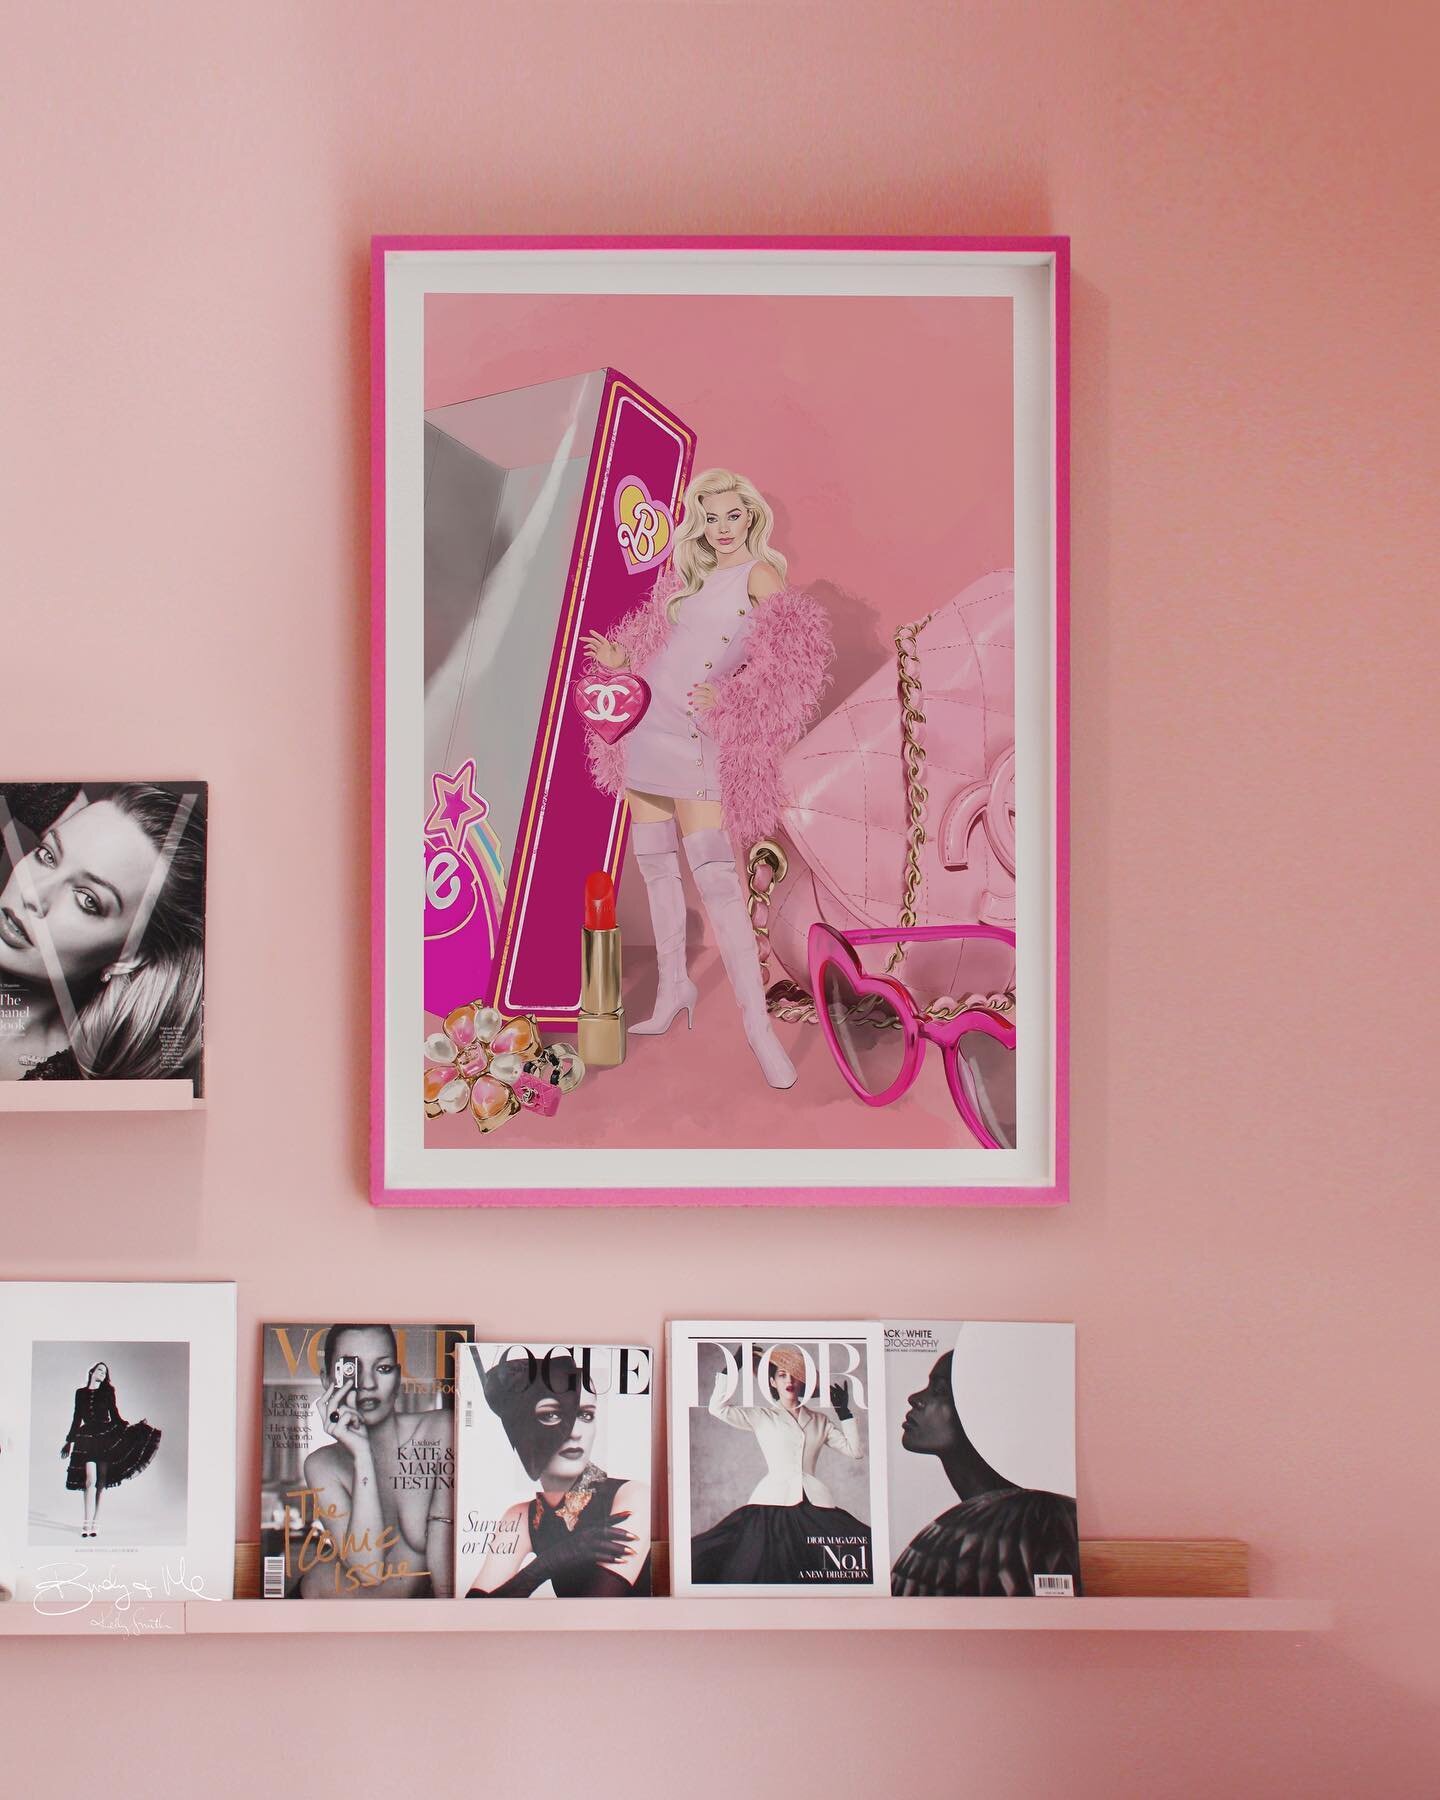 &lsquo;She&rsquo;s Everything&rsquo; pretty in pink 🩷
My Margot as Barbie prints are available now in ze shop!